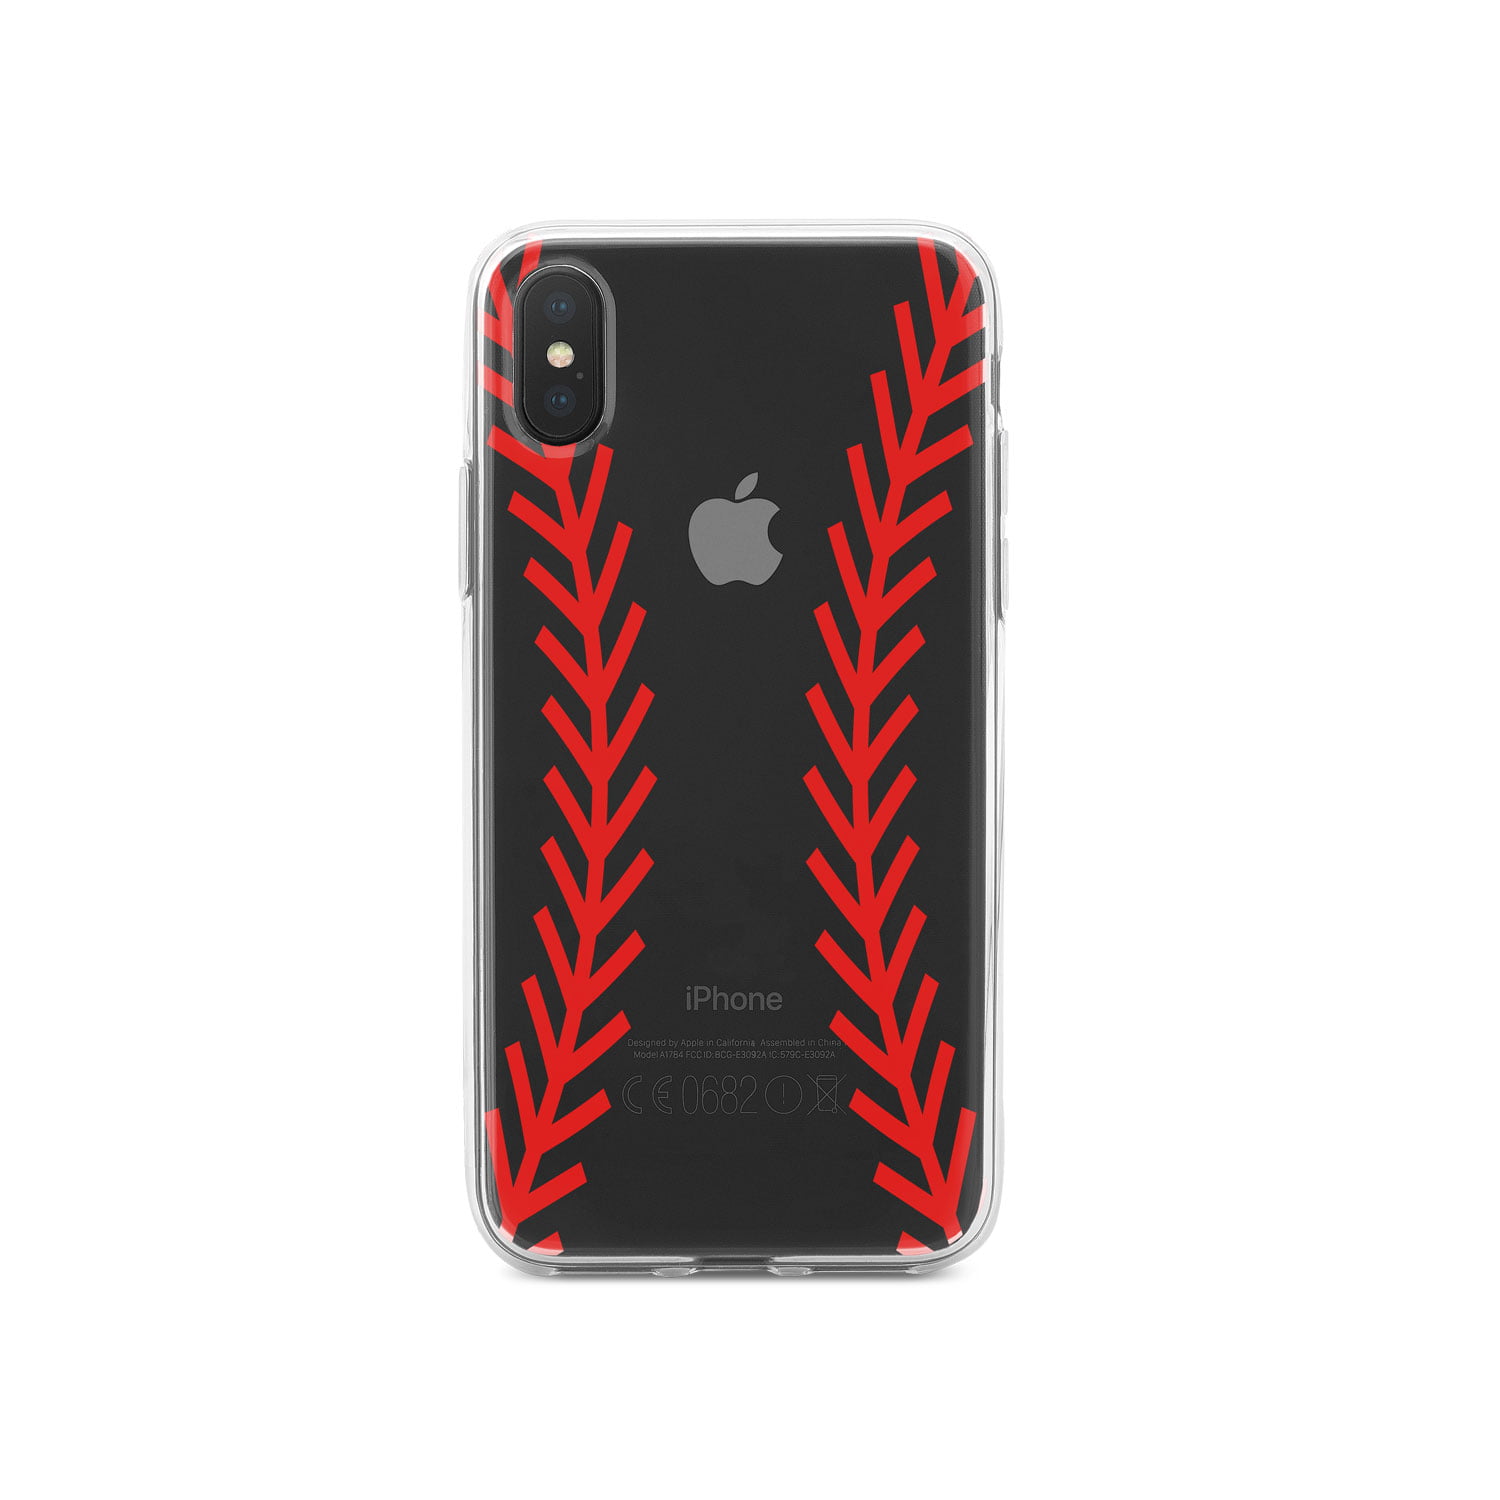 ELMY iPhone XR Case 6.1,Baseball Team Case Cover for iPhone XR